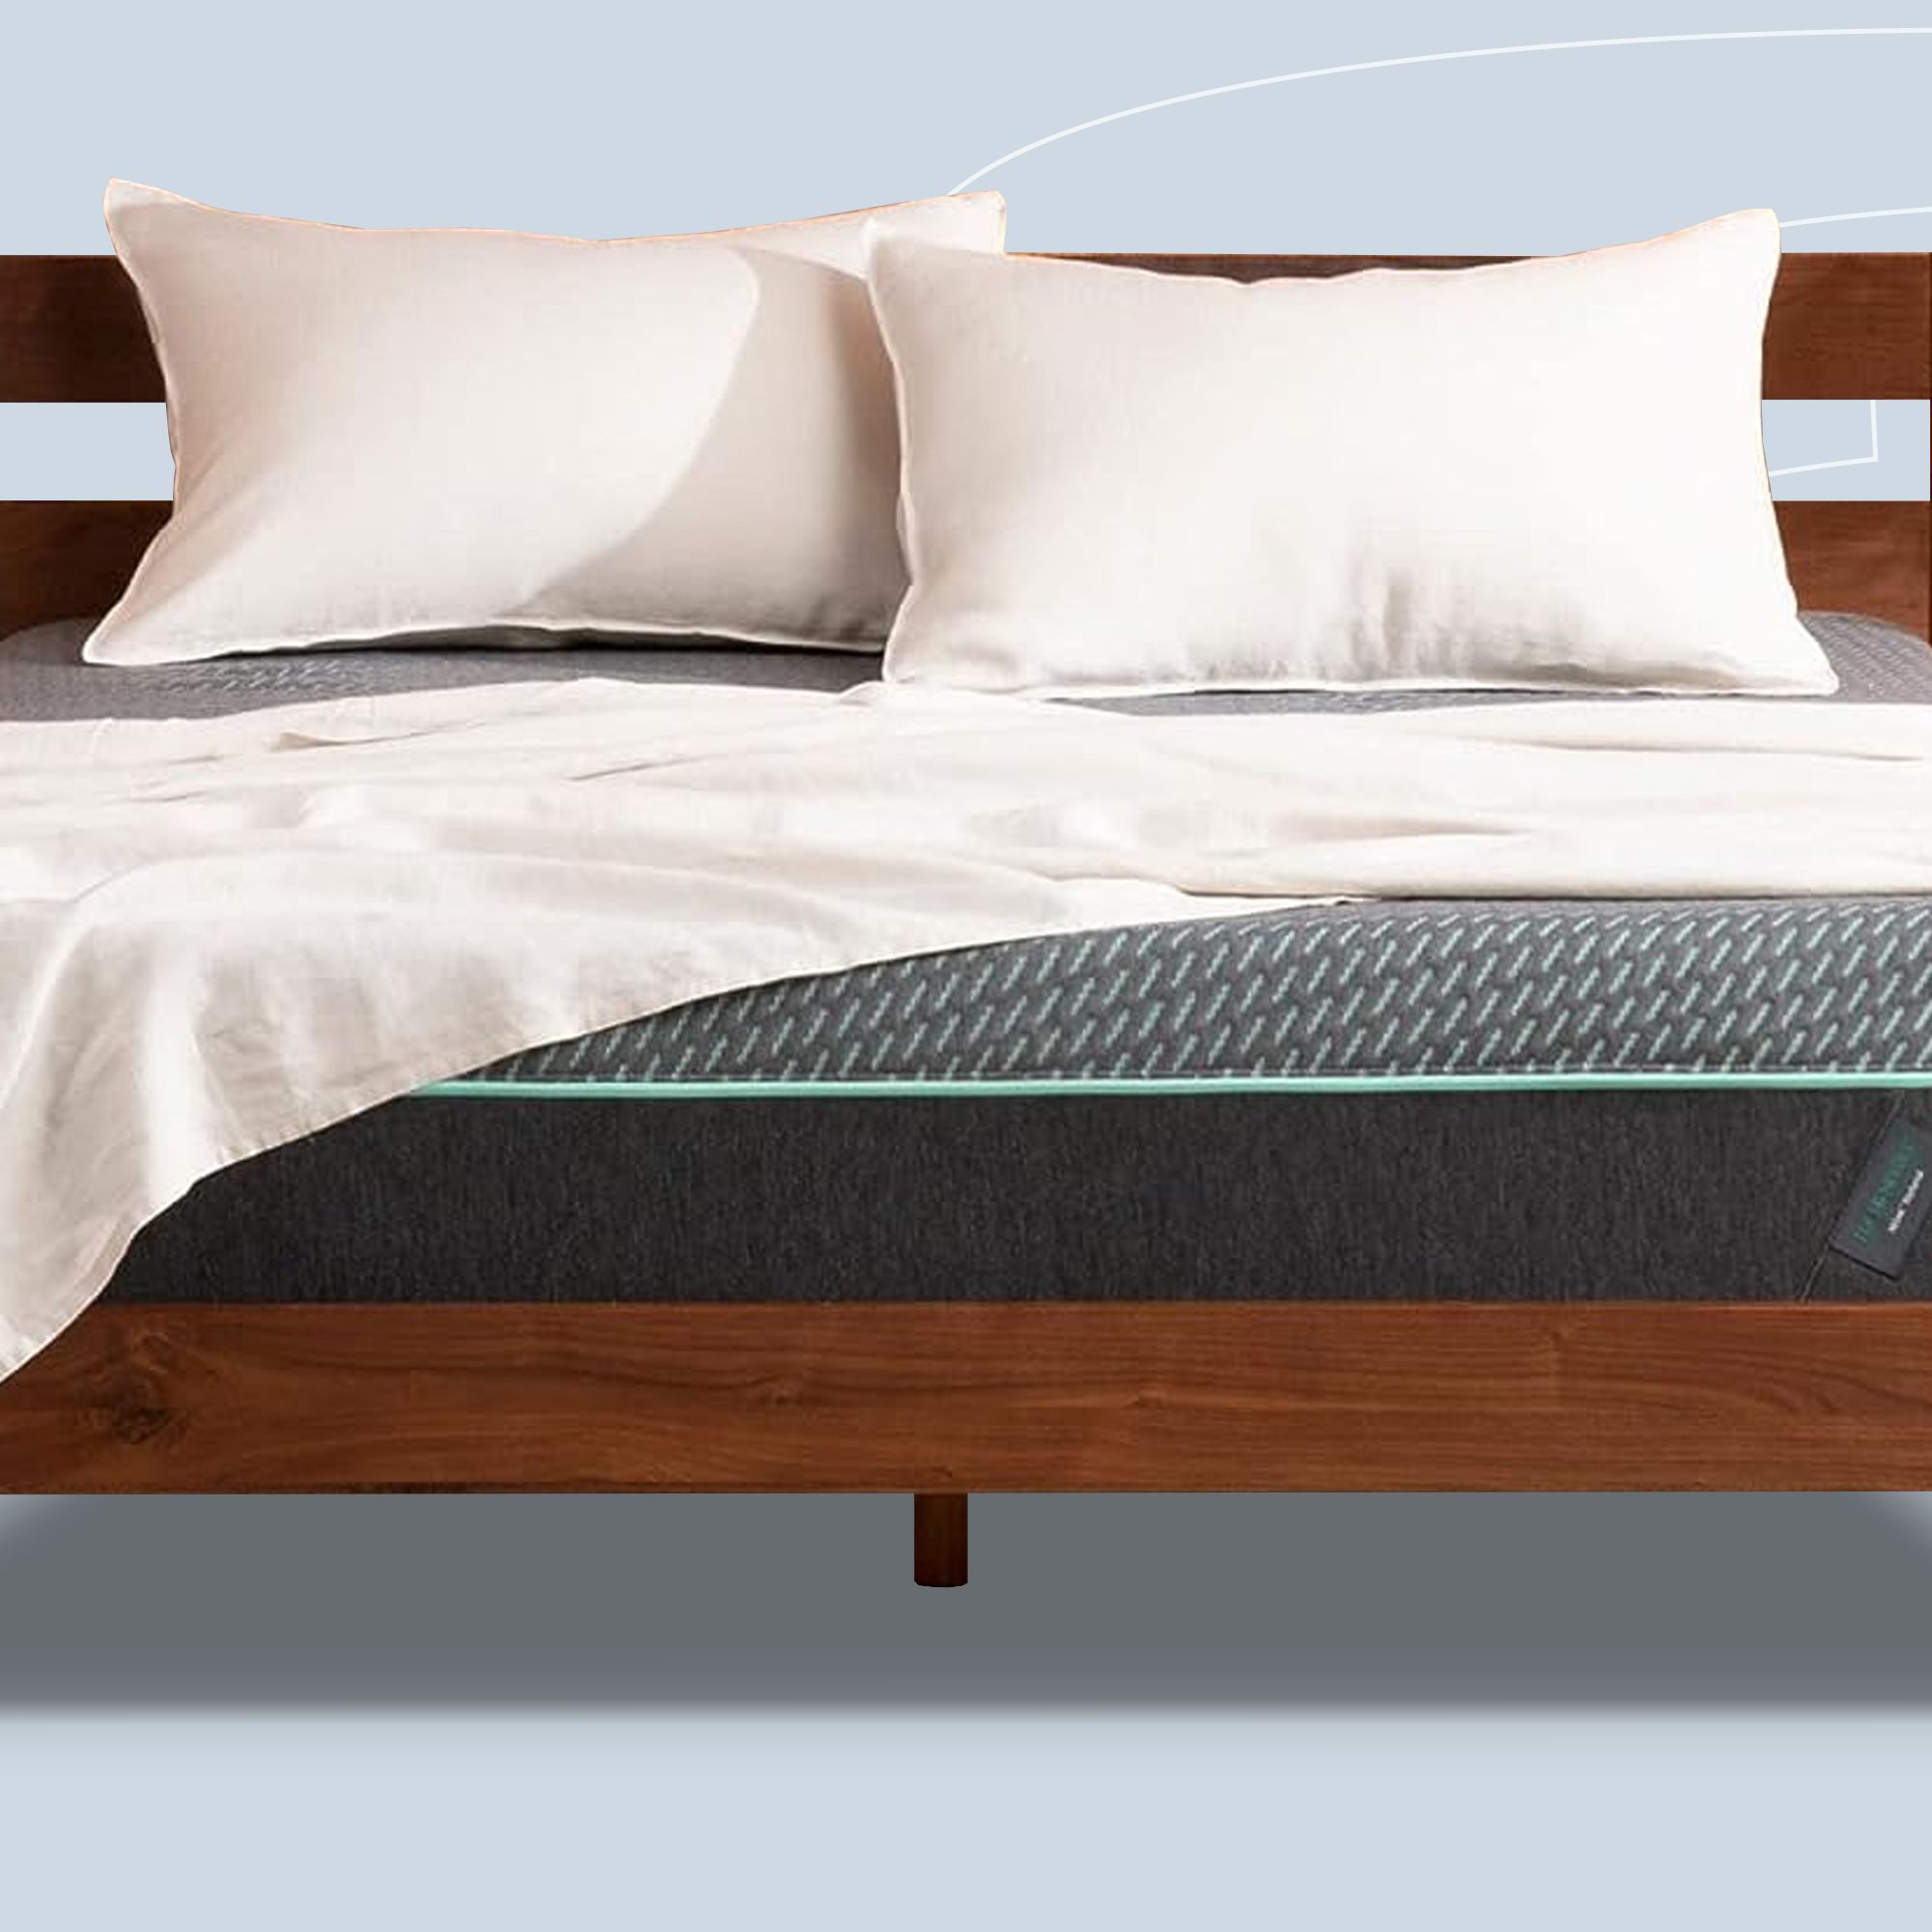 5 Mattresses For Side Sleepers That Offer the Support You Need